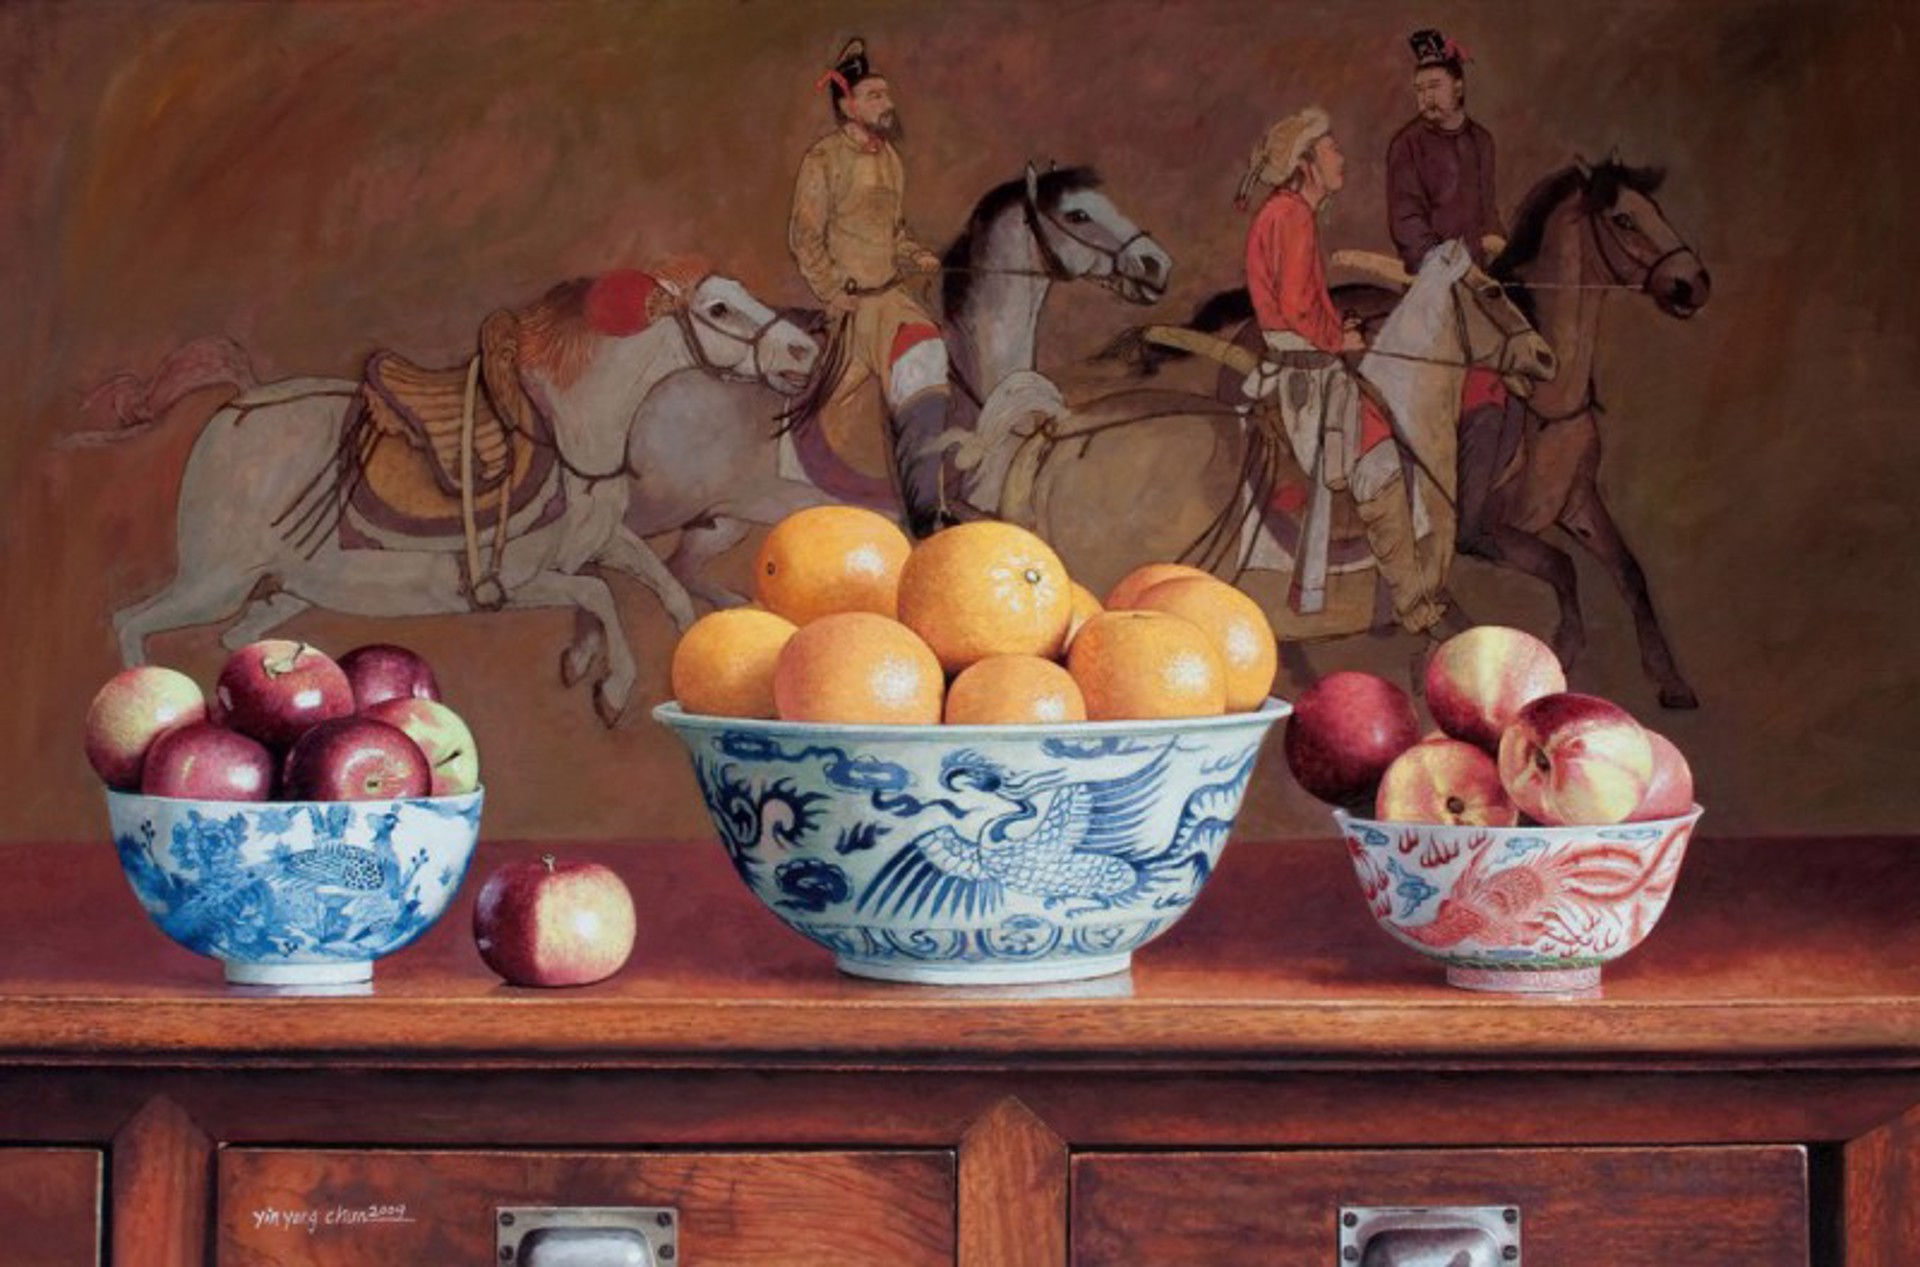 Riding Horses with Three Bowls of Fruit by Yin Yong Chun